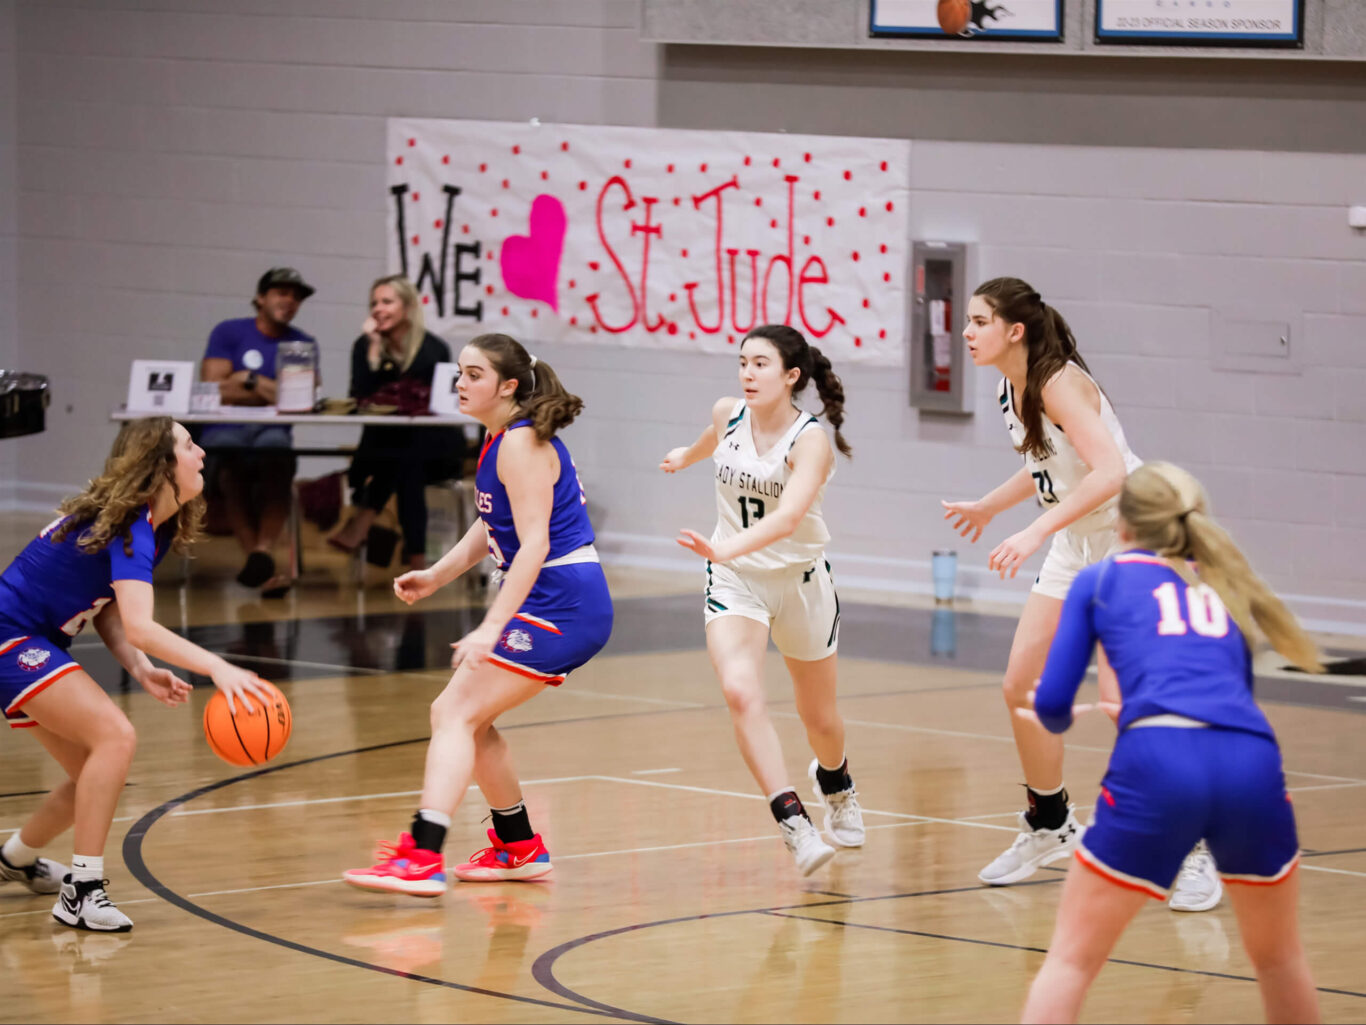 A group of girls engaged in a spirited game of basketball in a gym.